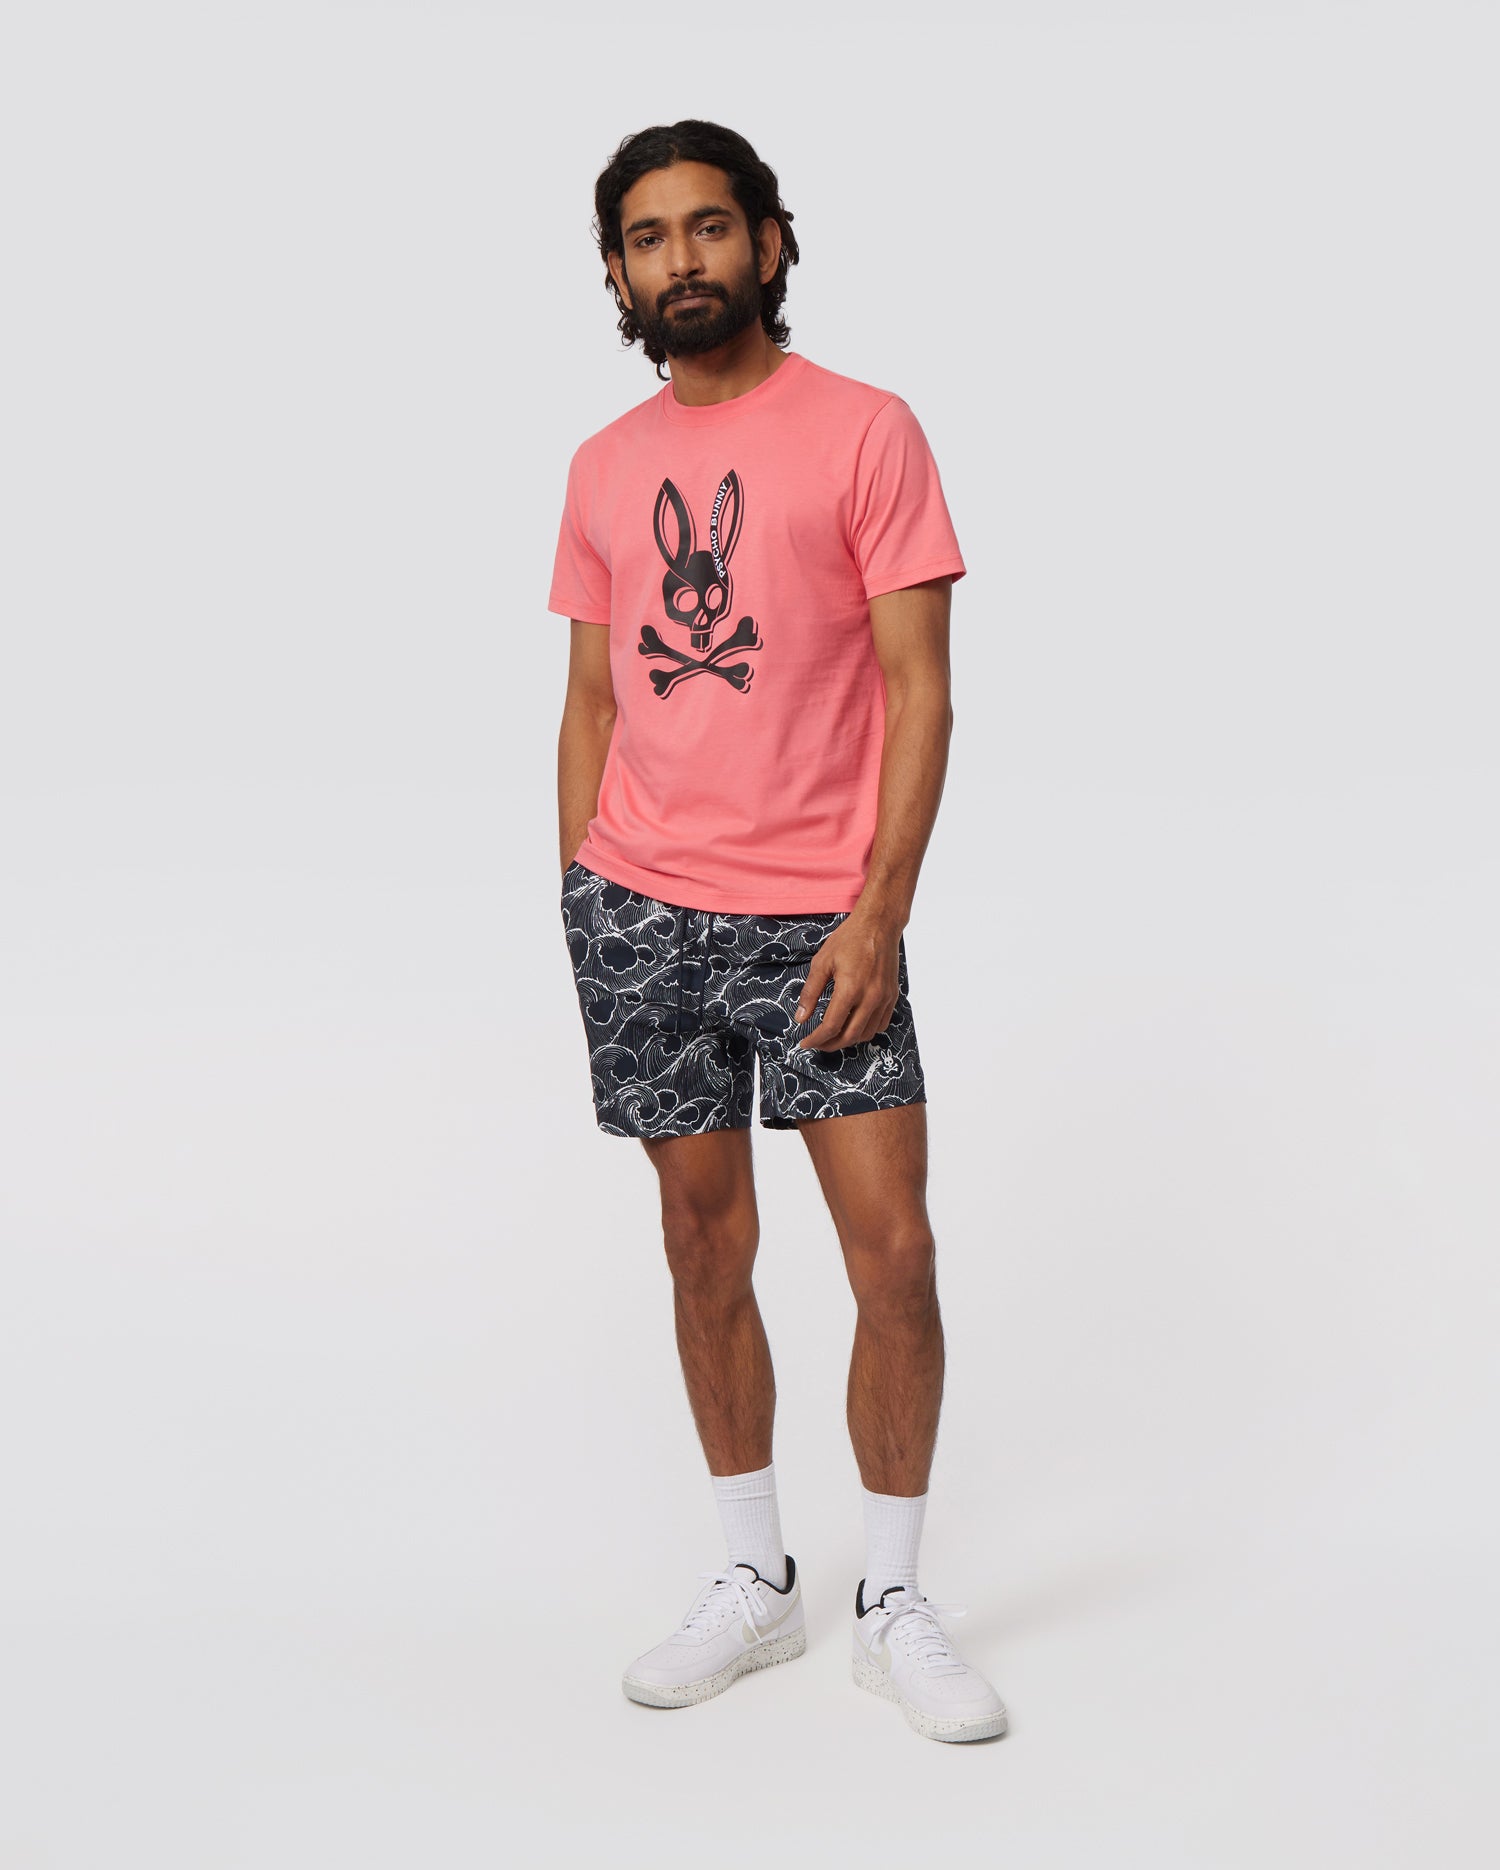 Psycho Bunny Sale | Clothing & Accessories for Men & Kids